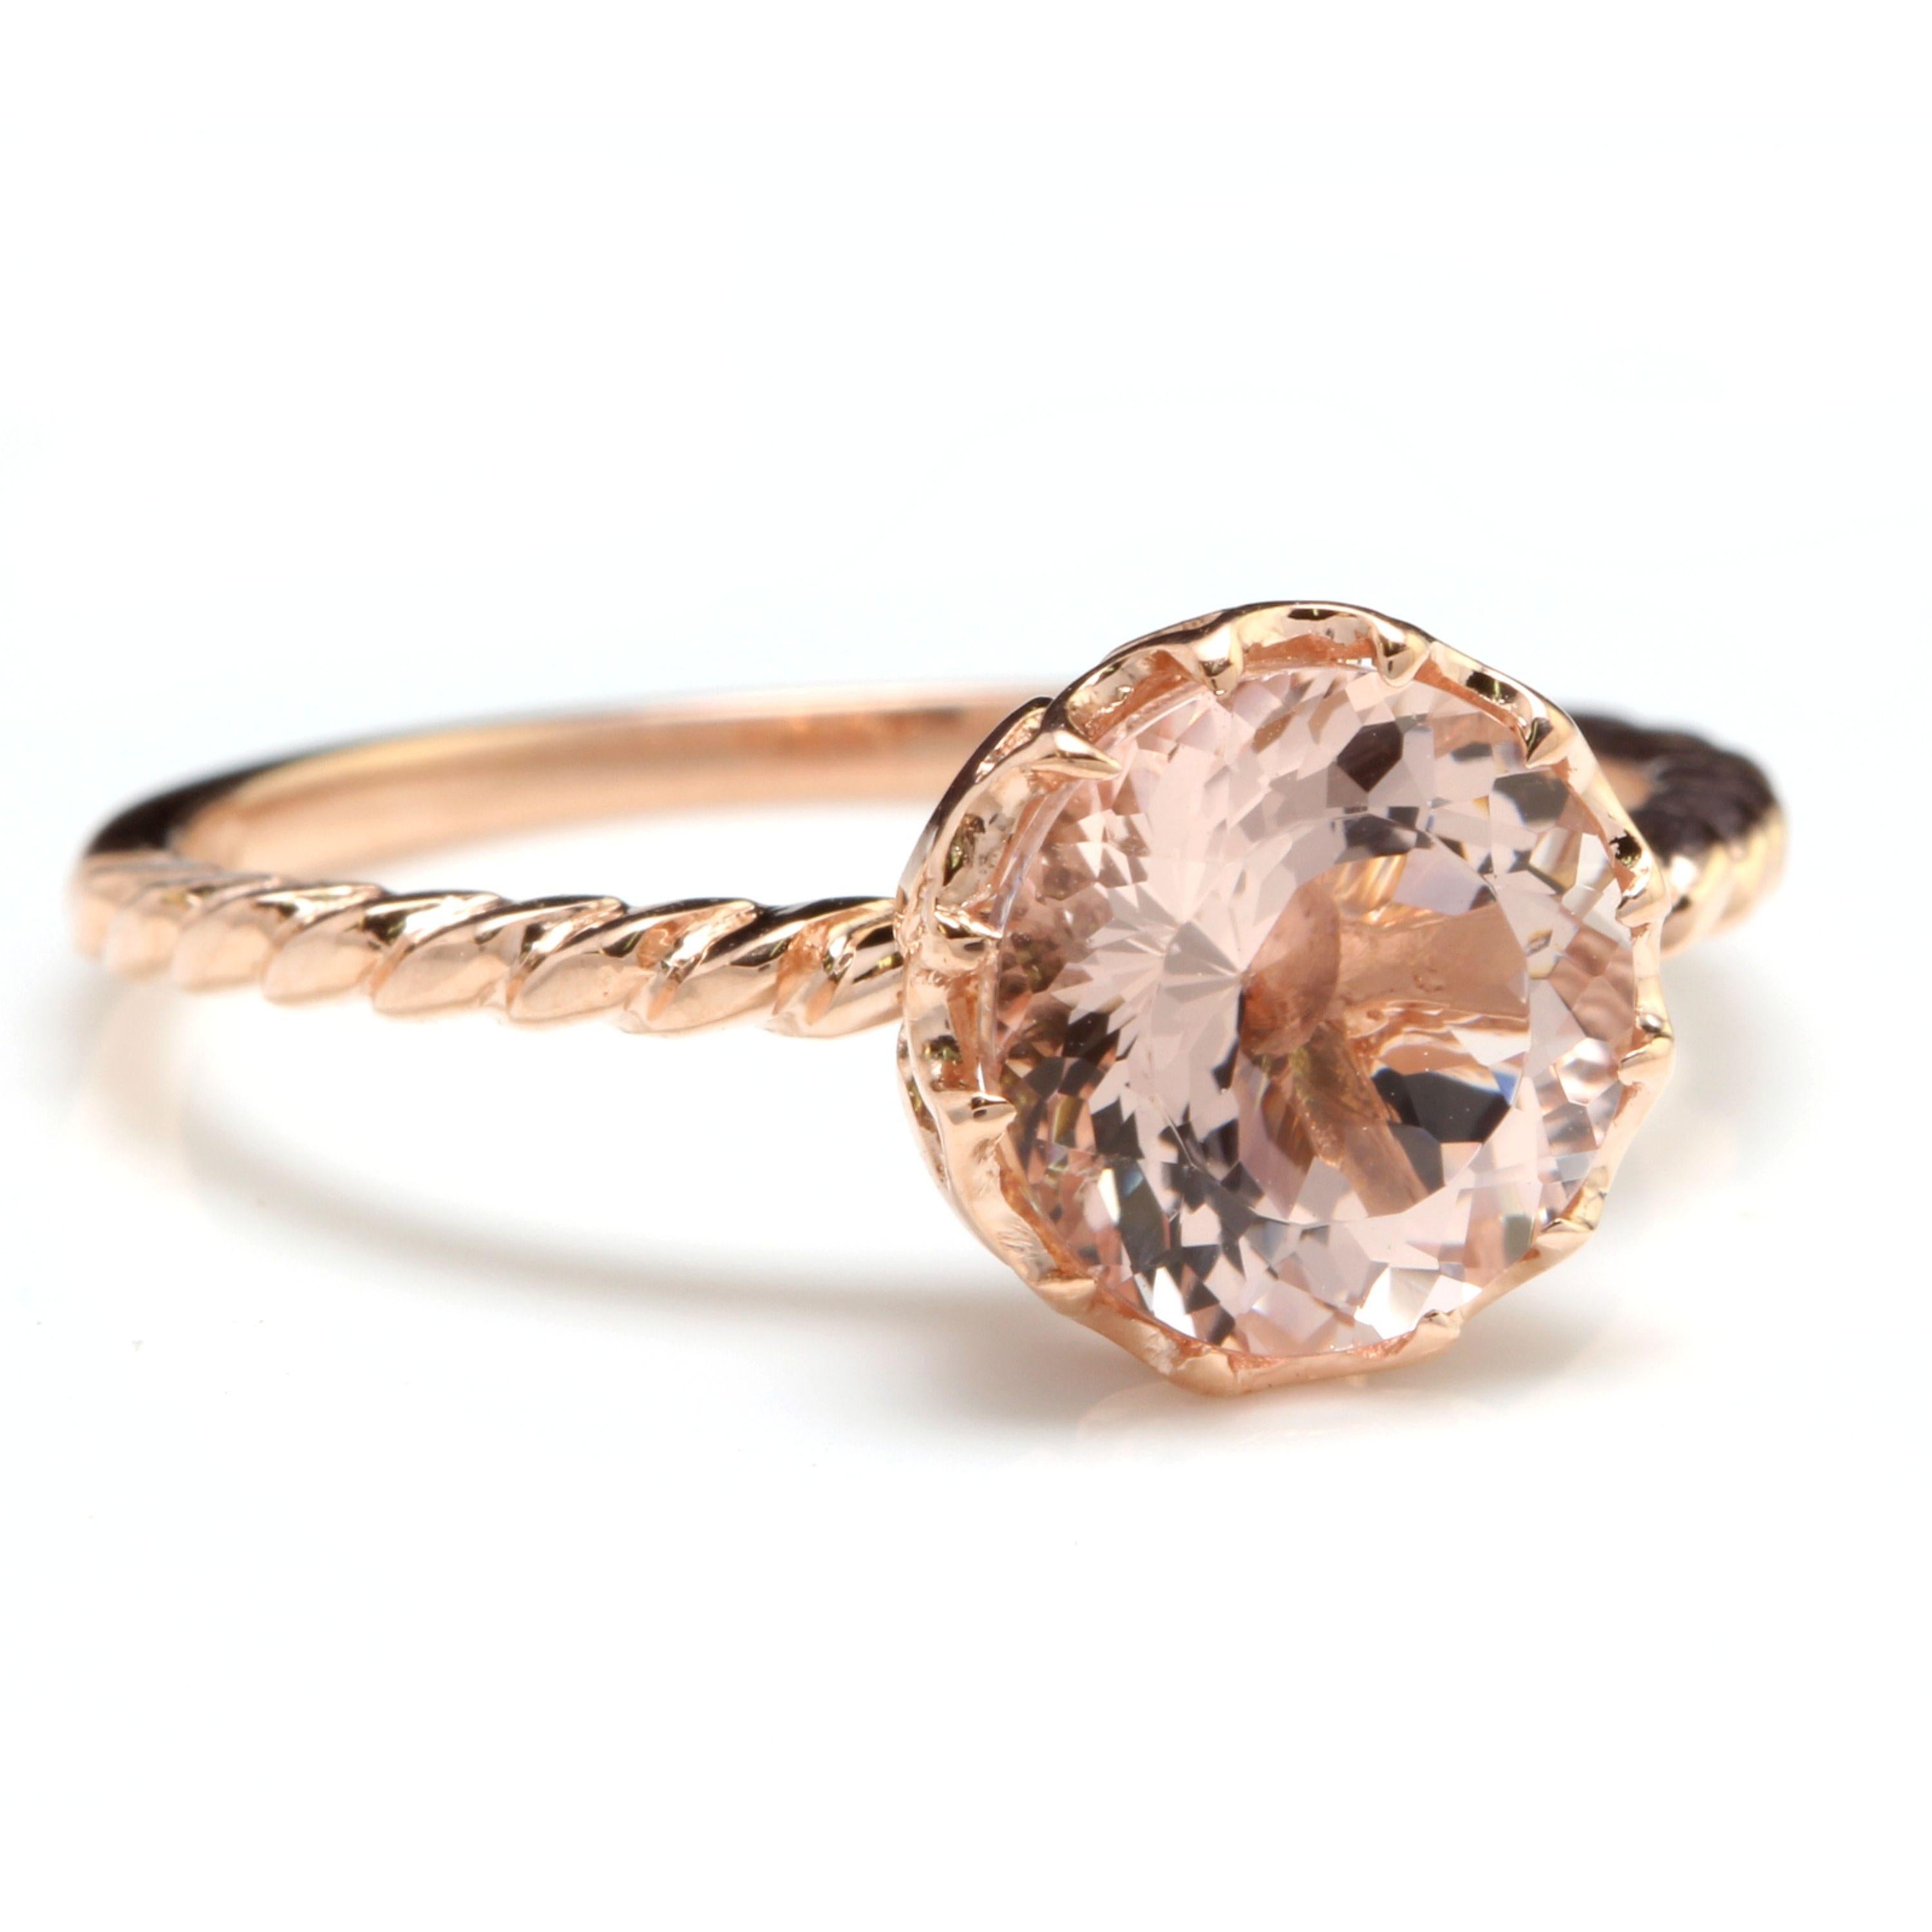 1.50 Carats Exquisite Natural Morganite 14K Solid Rose Gold Ring

Total Natural Morganite Weight is: Approx. 1.50 Carats

Morganite Measures: Approx. 7.00mm

Ring size: 7.25 (we offer free re-sizing upon request)

Ring total weight: 2.1